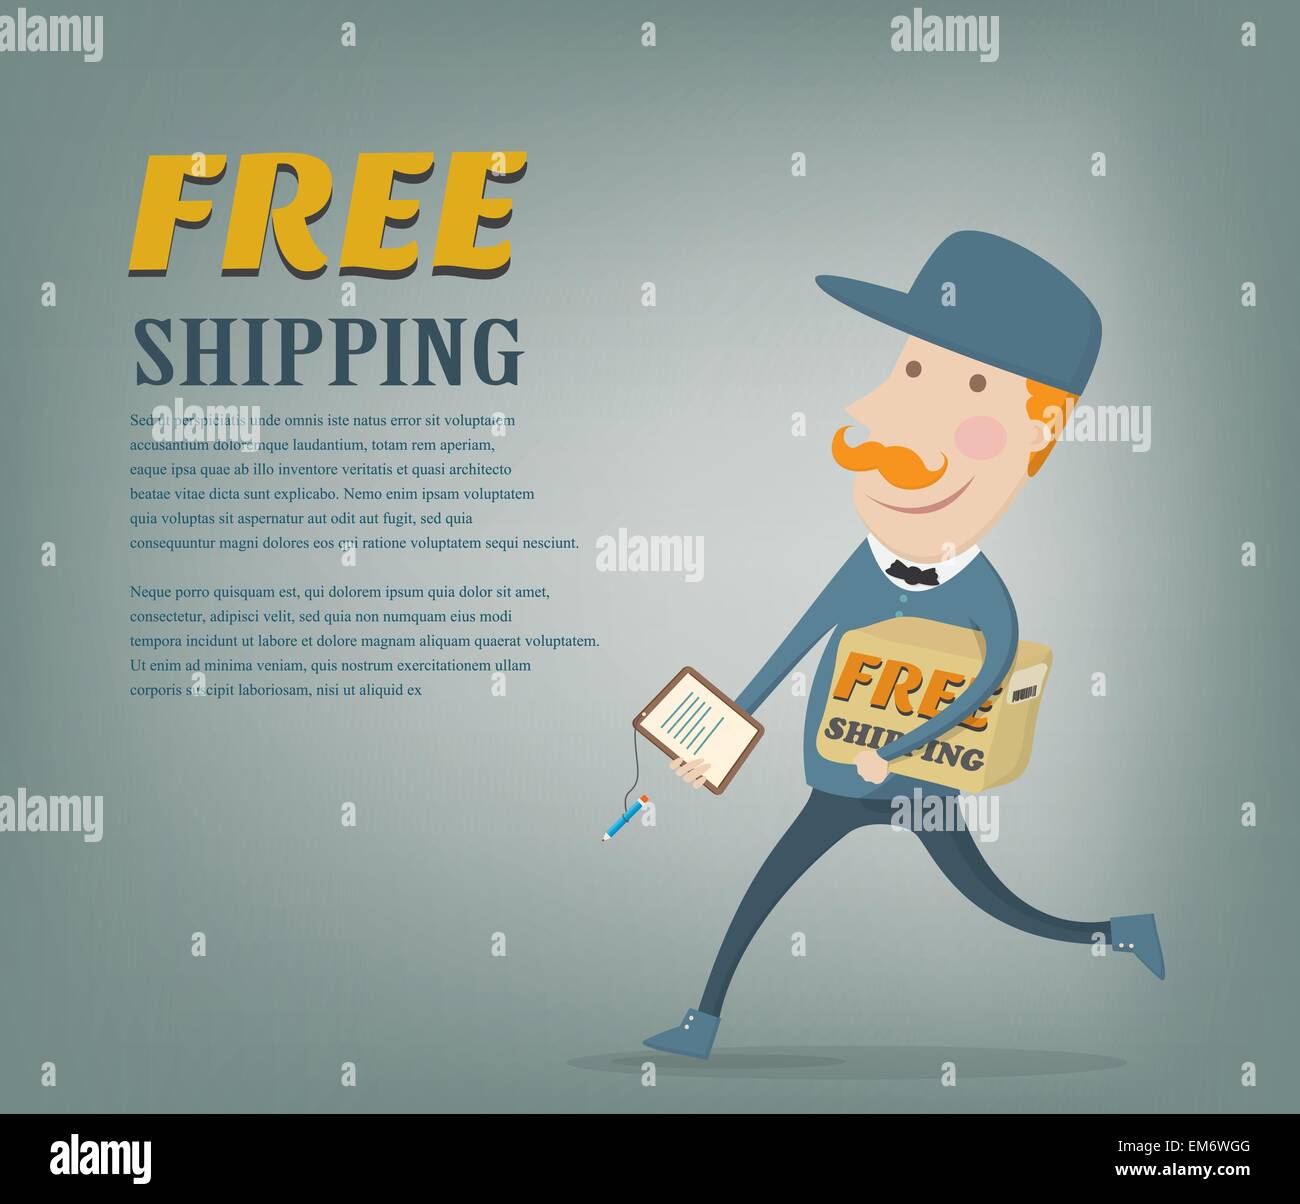 Free shipping. Courier delivering a package shipped for free, space for your text available Stock Vector